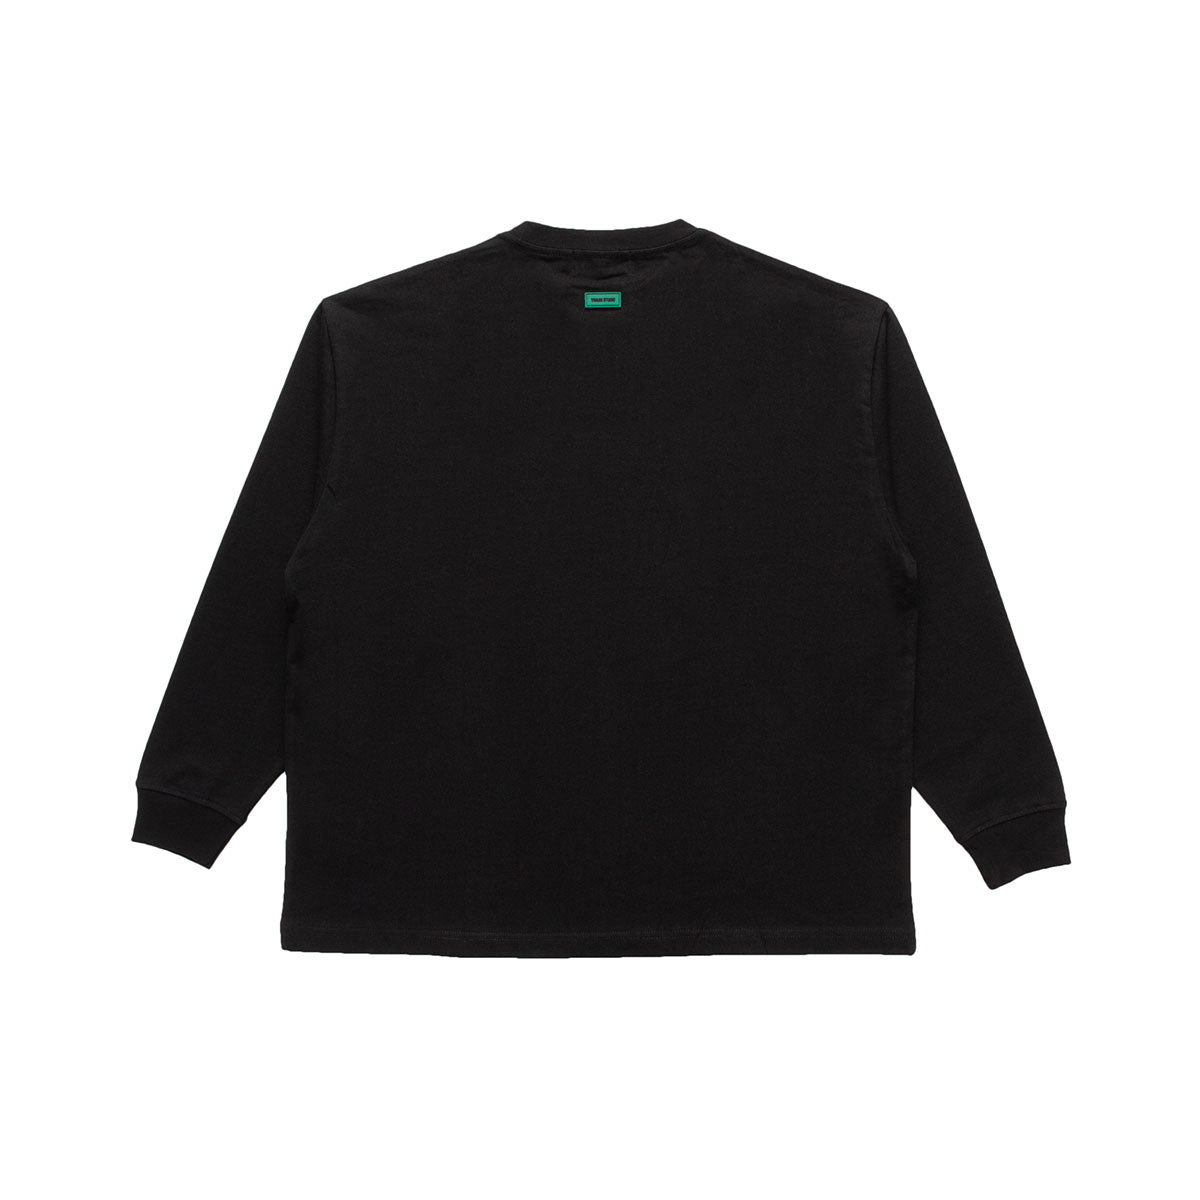 XLサイズ Blacked Out Black Long Sleeve Tee